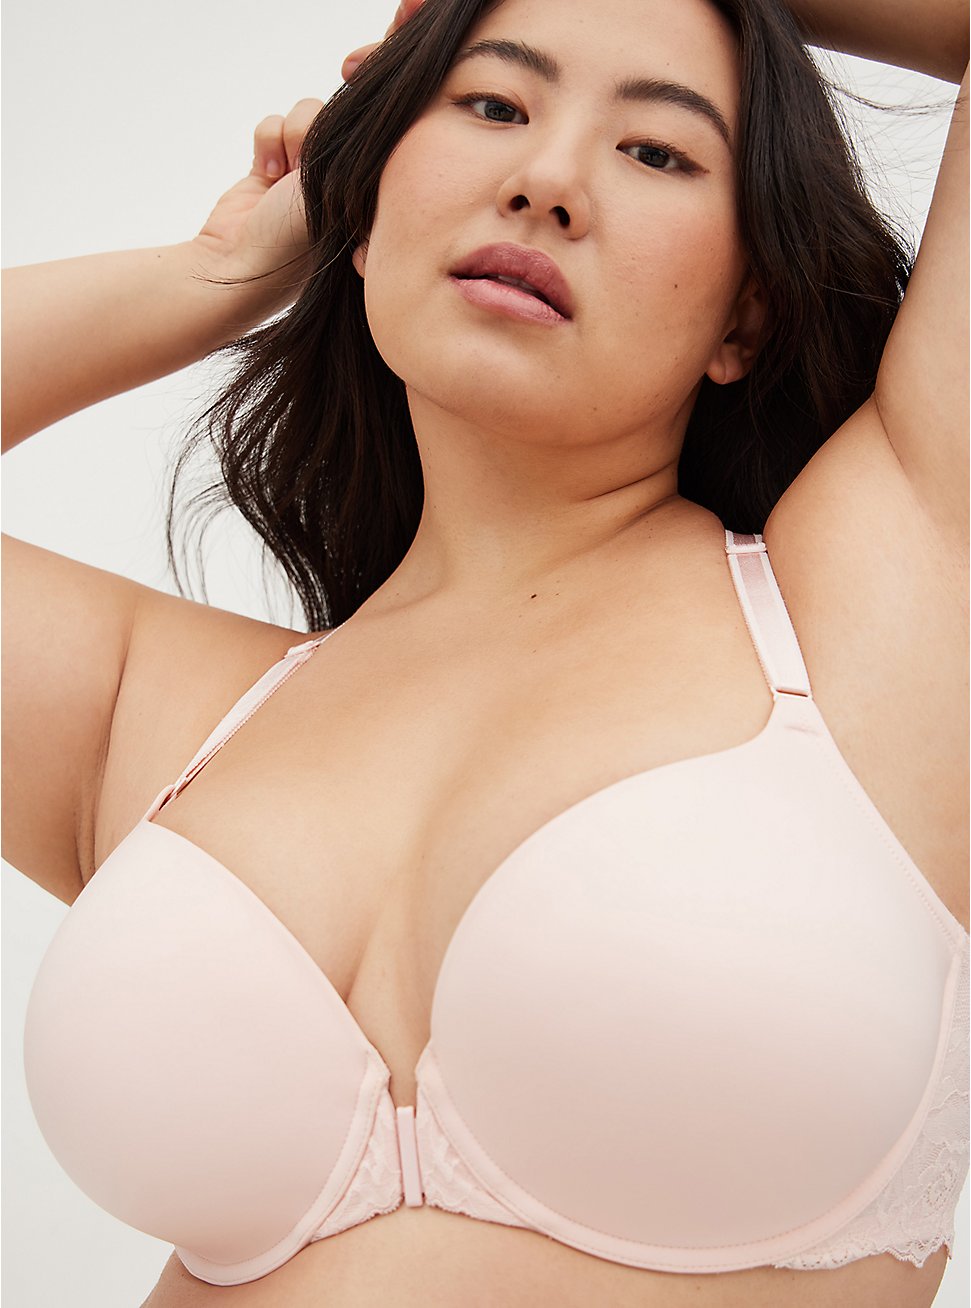 Plus Size Front-Closure Lightly Lined T-Shirt Bra - Pink with Racerback, PINK DOGWOOD POLIGNAC DIP DYE, hi-res